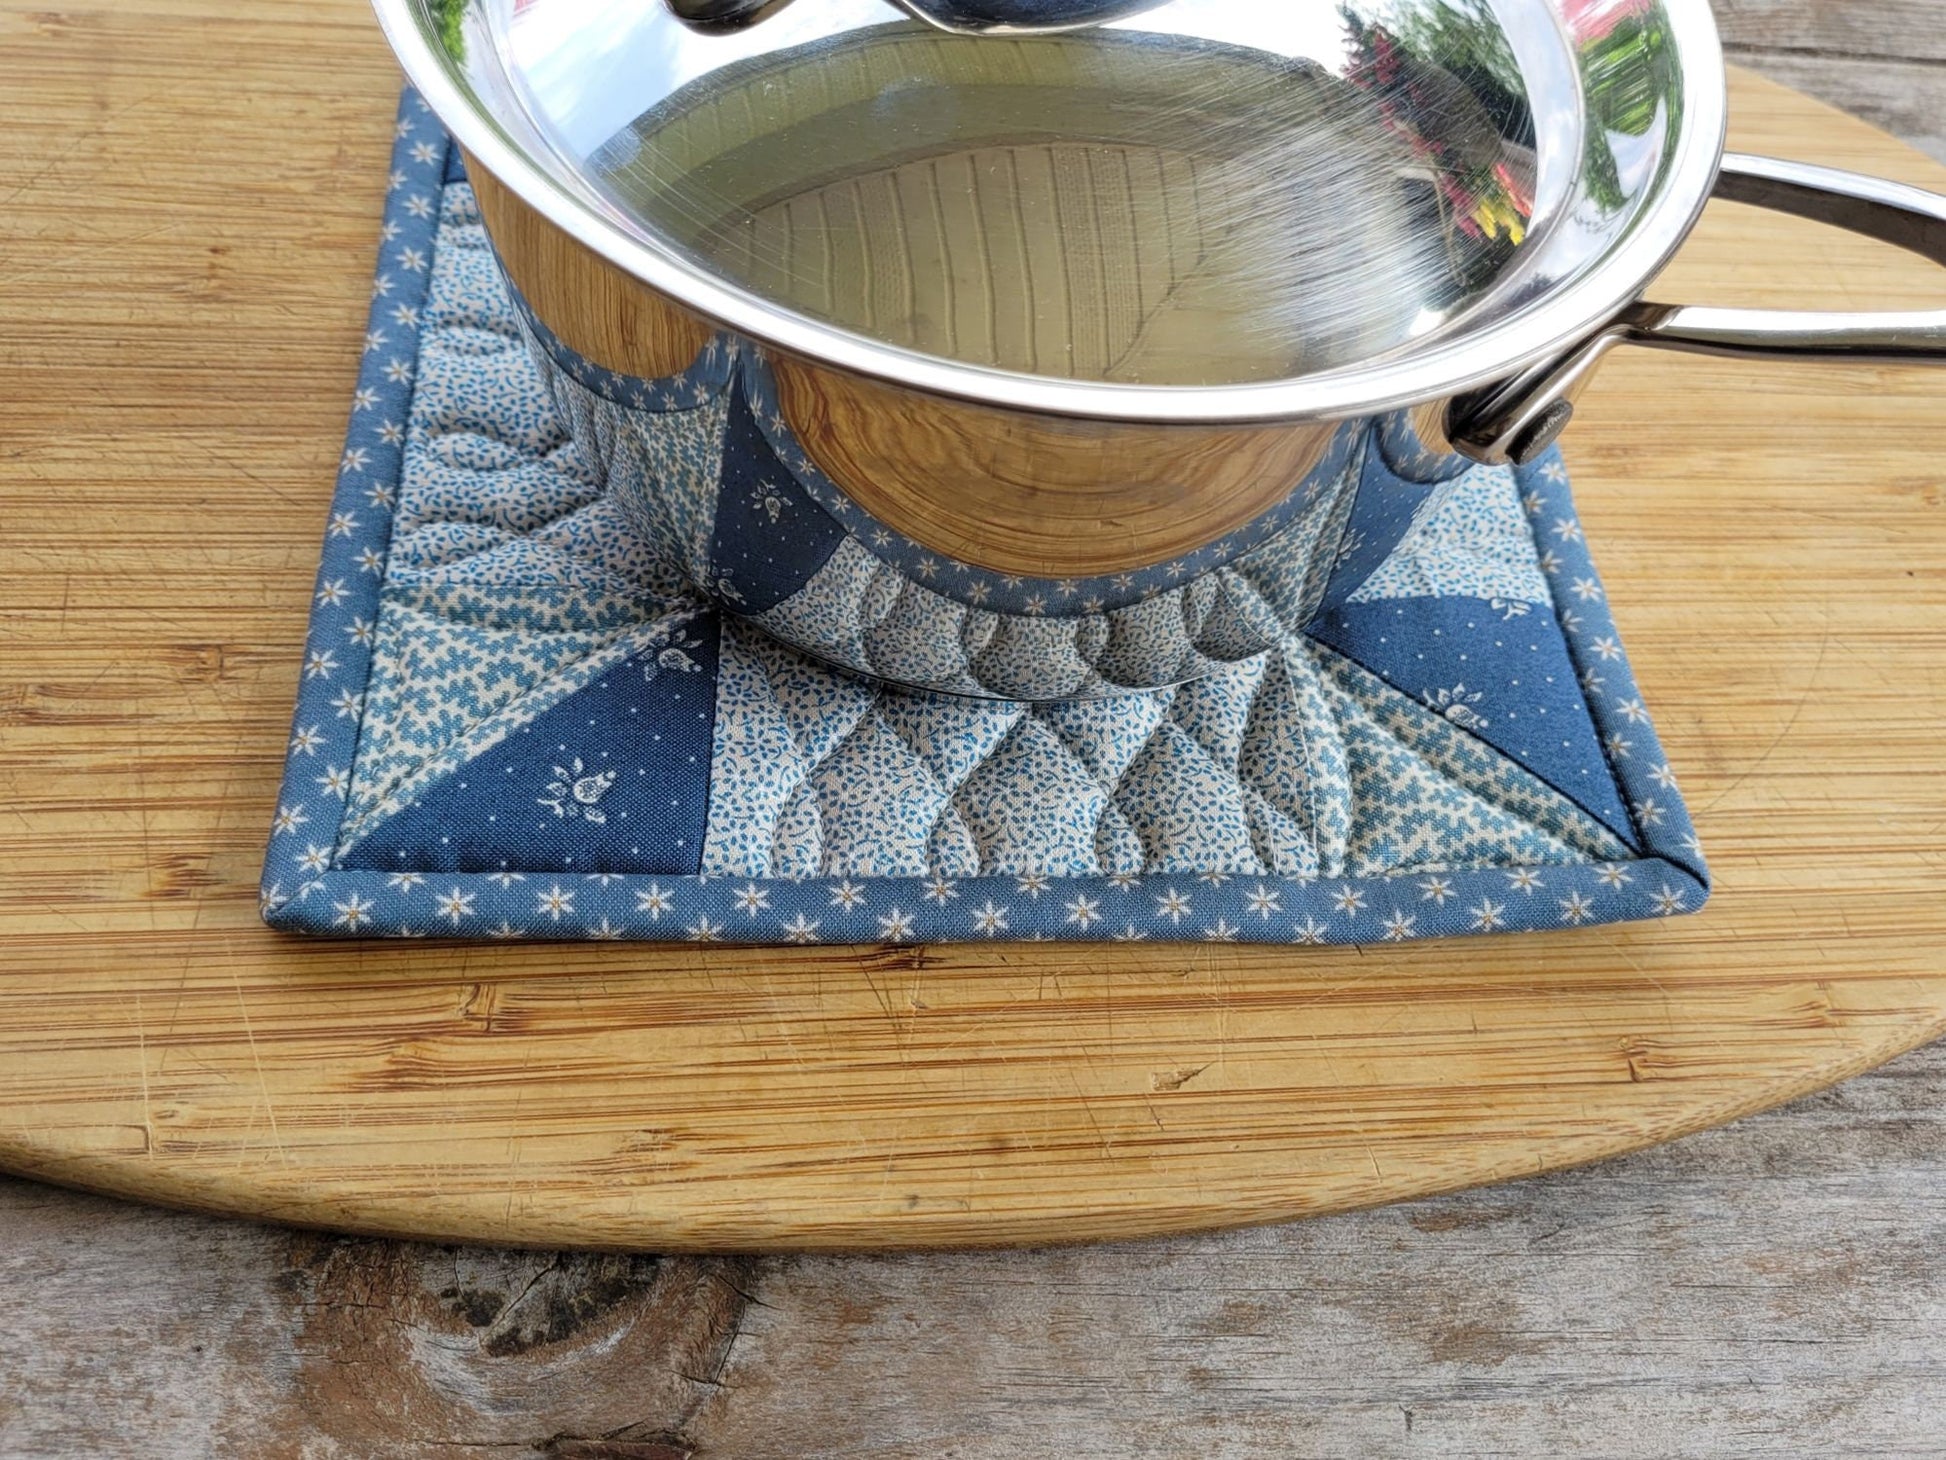 quilted potholder under a small size saucepan